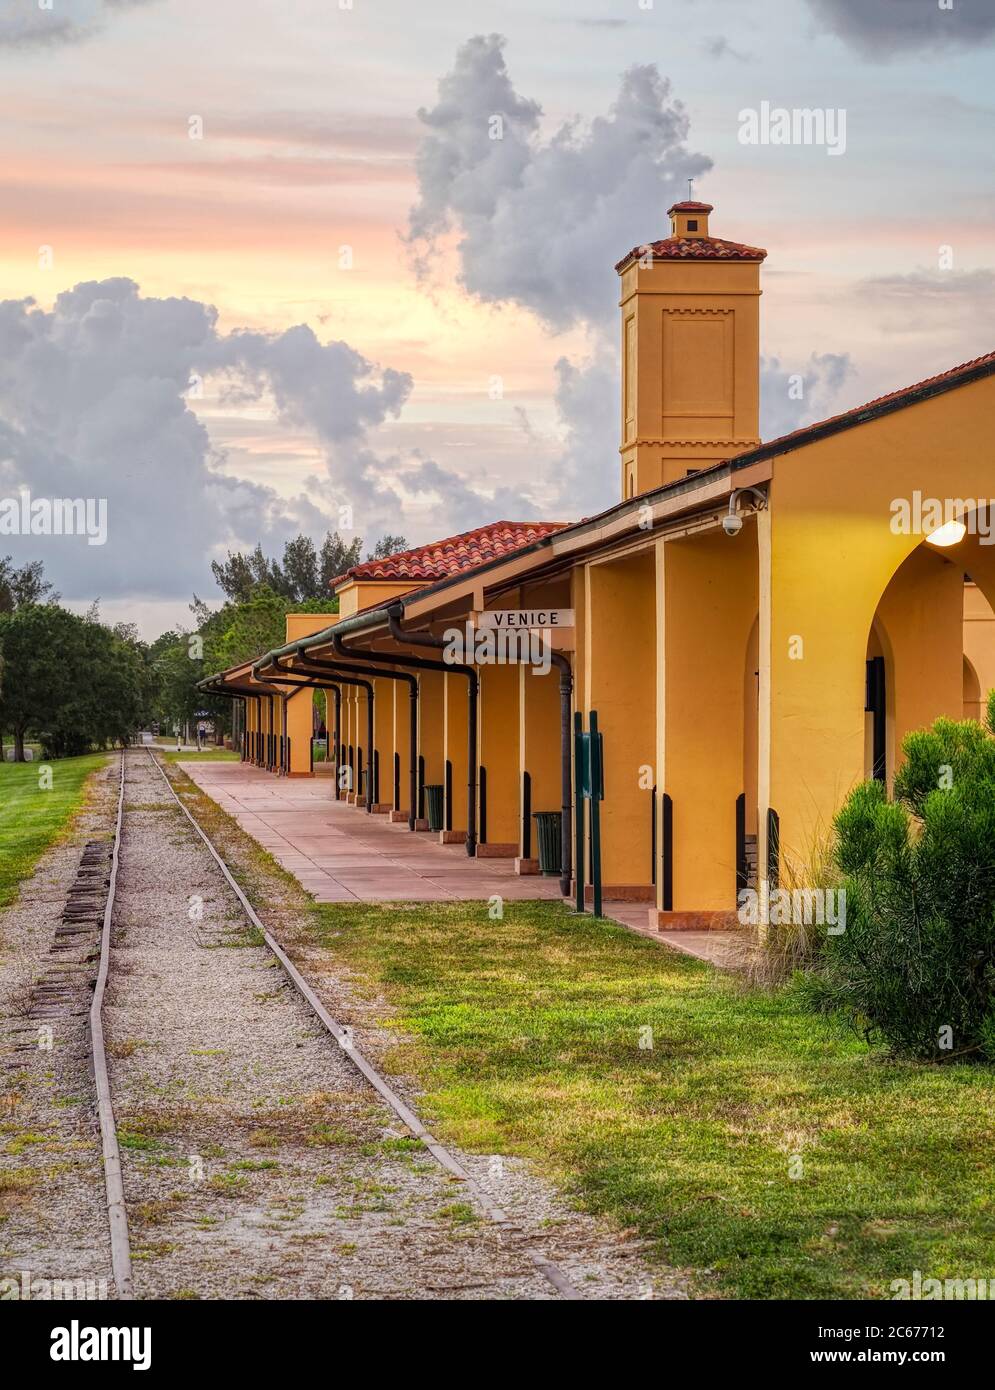 The Historic Mediterranean Revival style Venice Train Depot built in 1927 by the Seaboard Air Line Railway in Venice Florida in the United States Stock Photo